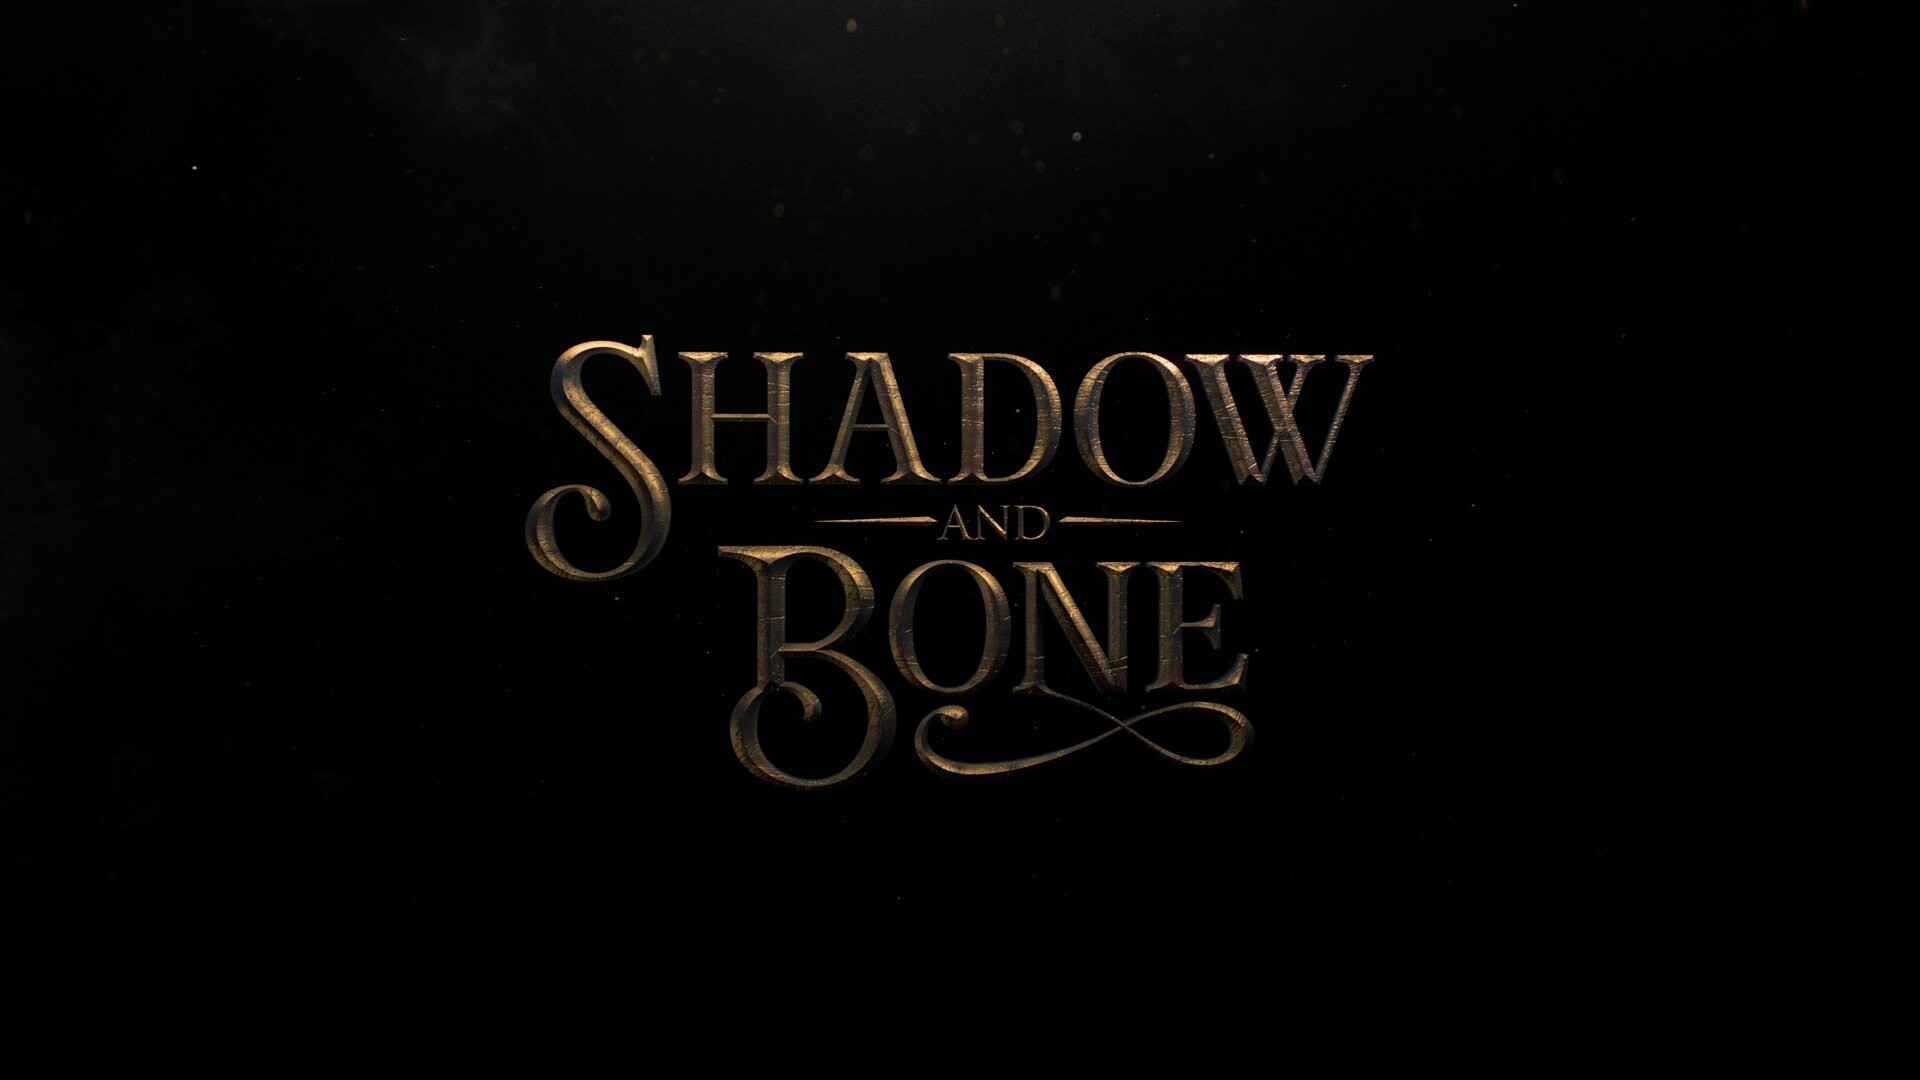 Shadow and Bone: Based on The Grisha Trilogy and the Six of Crows Duology both written by Leigh Bardugo. 1920x1080 Full HD Background.